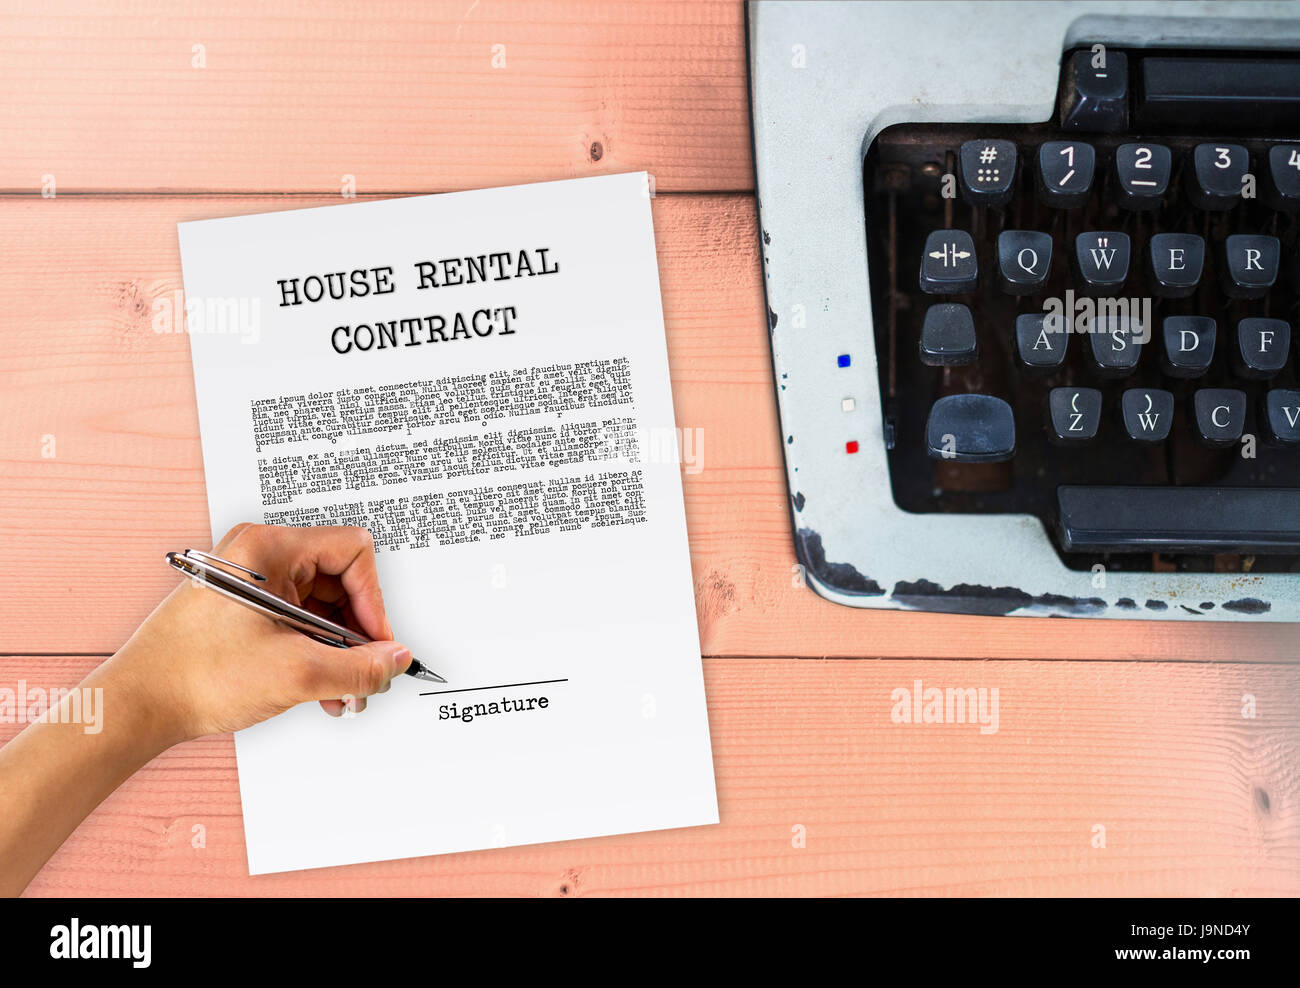 House rental agreement with hand signing on signature paper, with typewriter on wood table, vintage contract sign Stock Photo